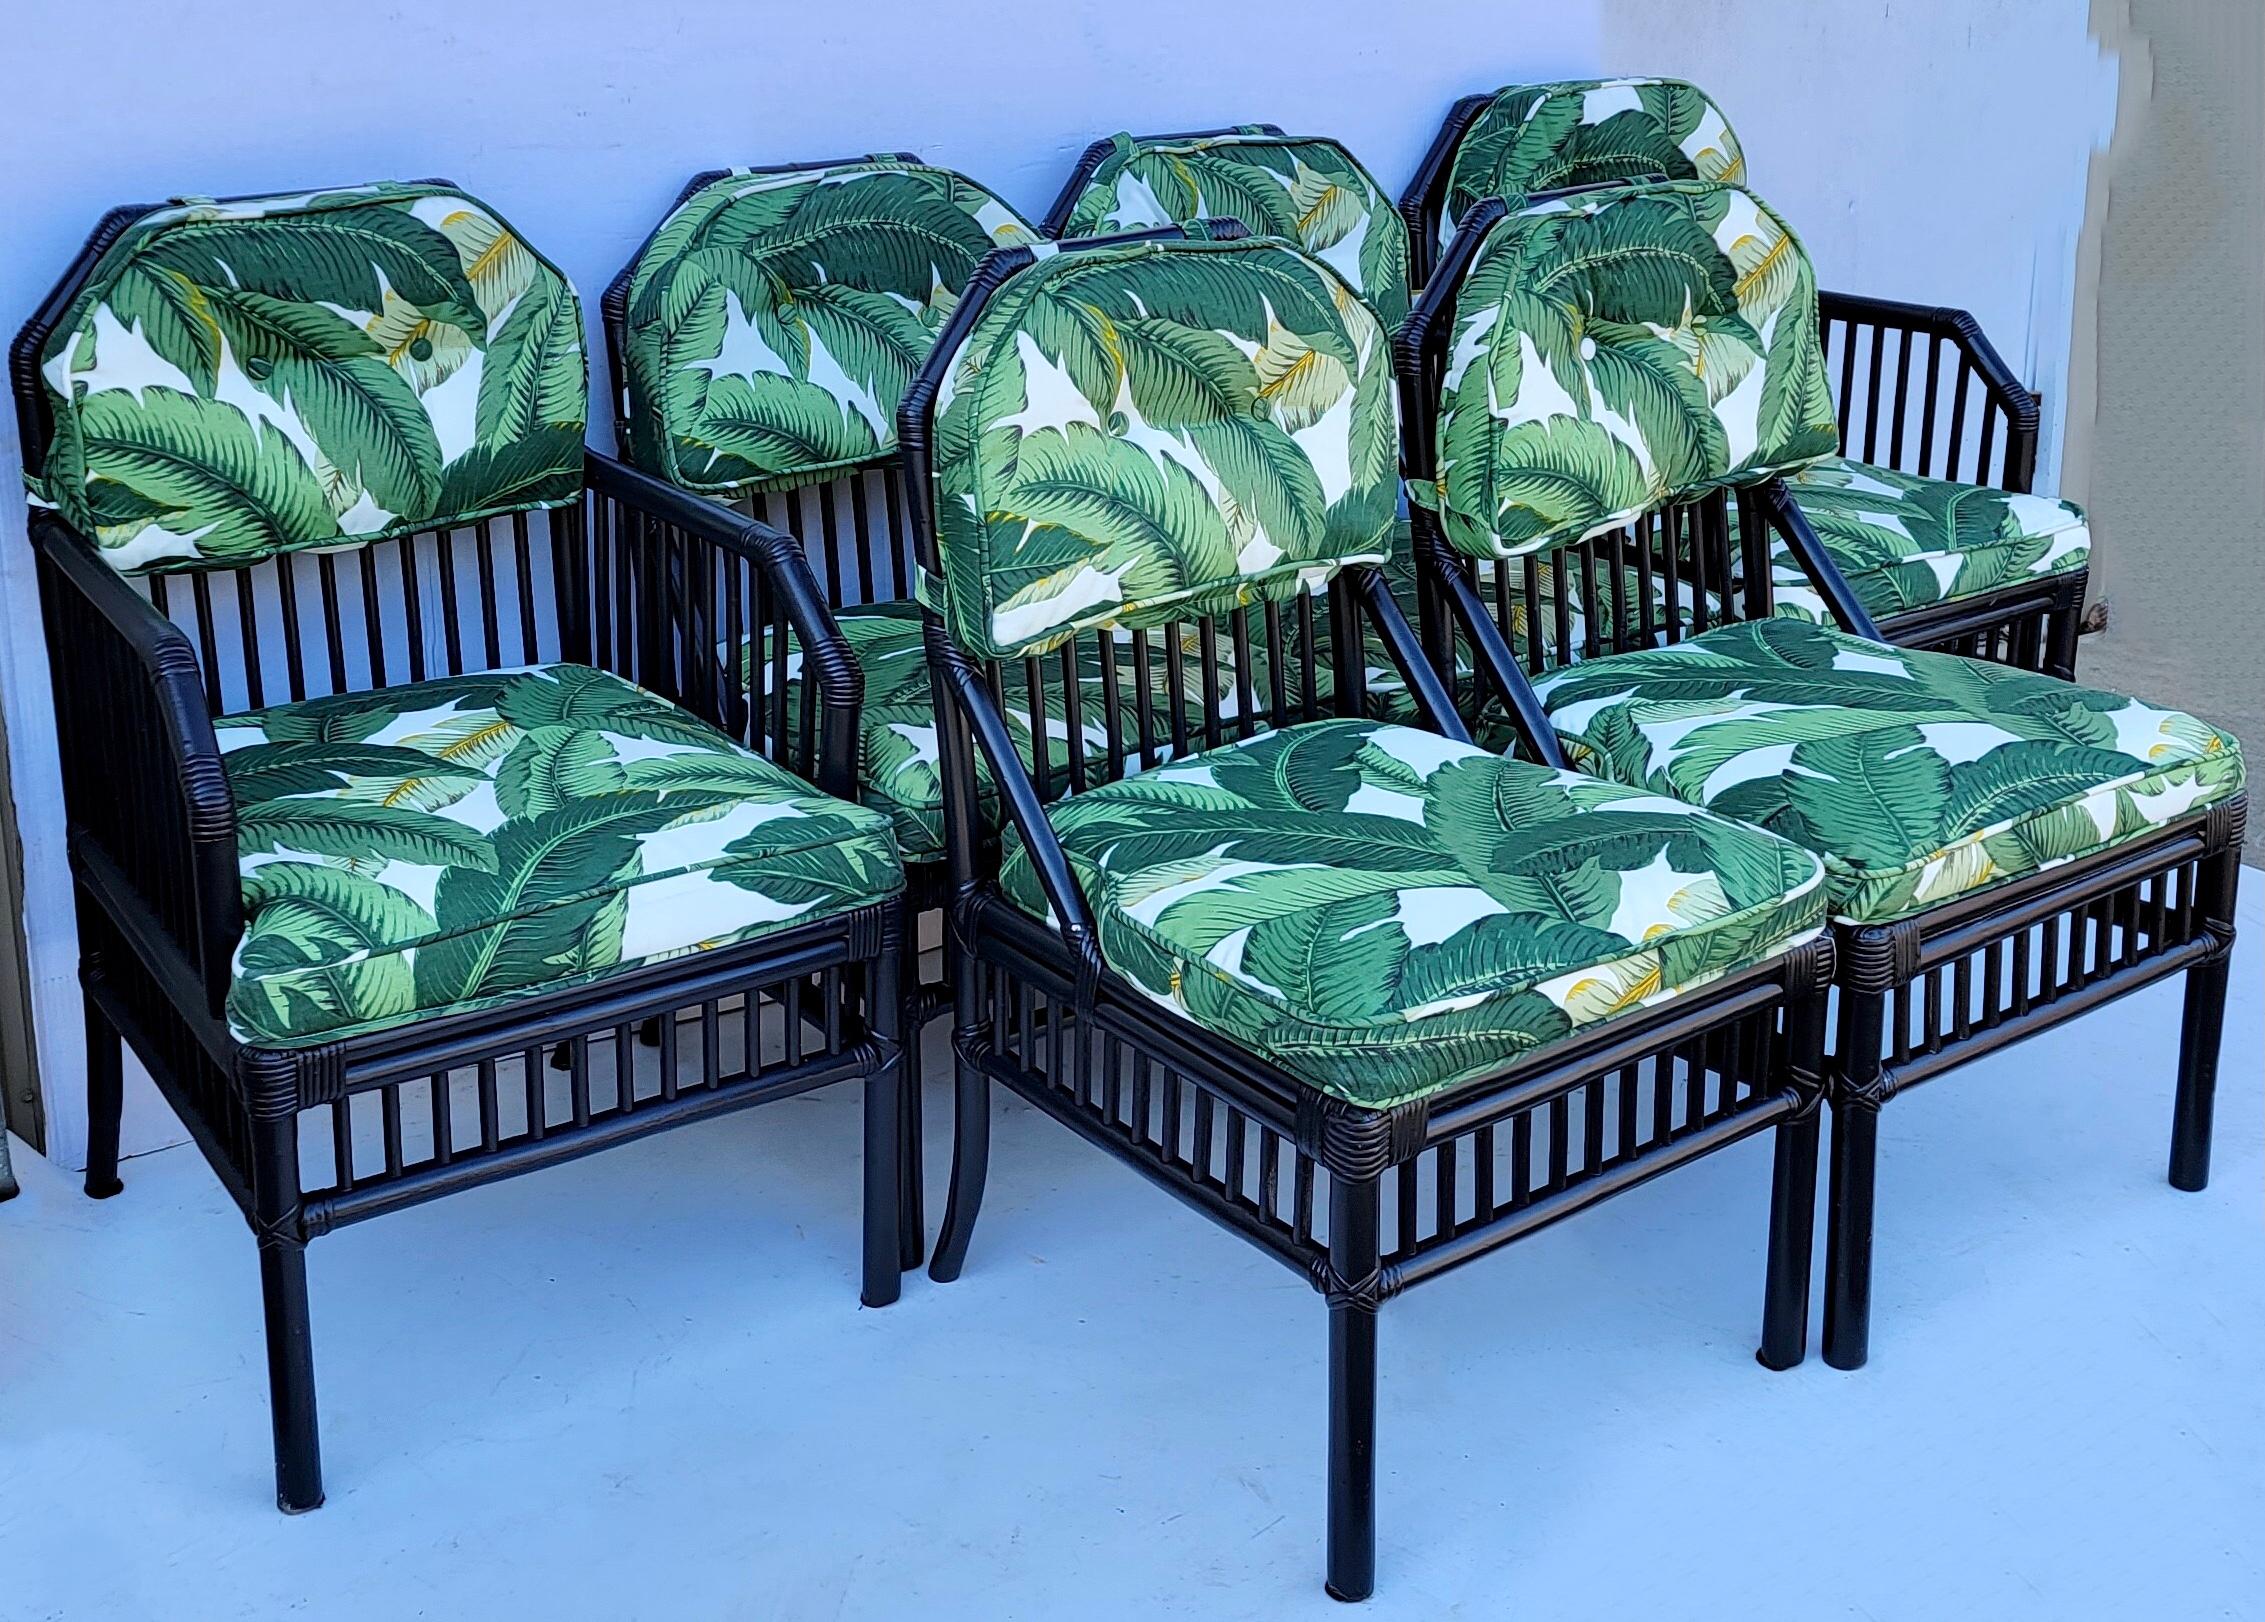 Upholstery Black Ficks Reed Rattan Dining Chairs in Tropical Banana Leaf Fabric, Set of 6